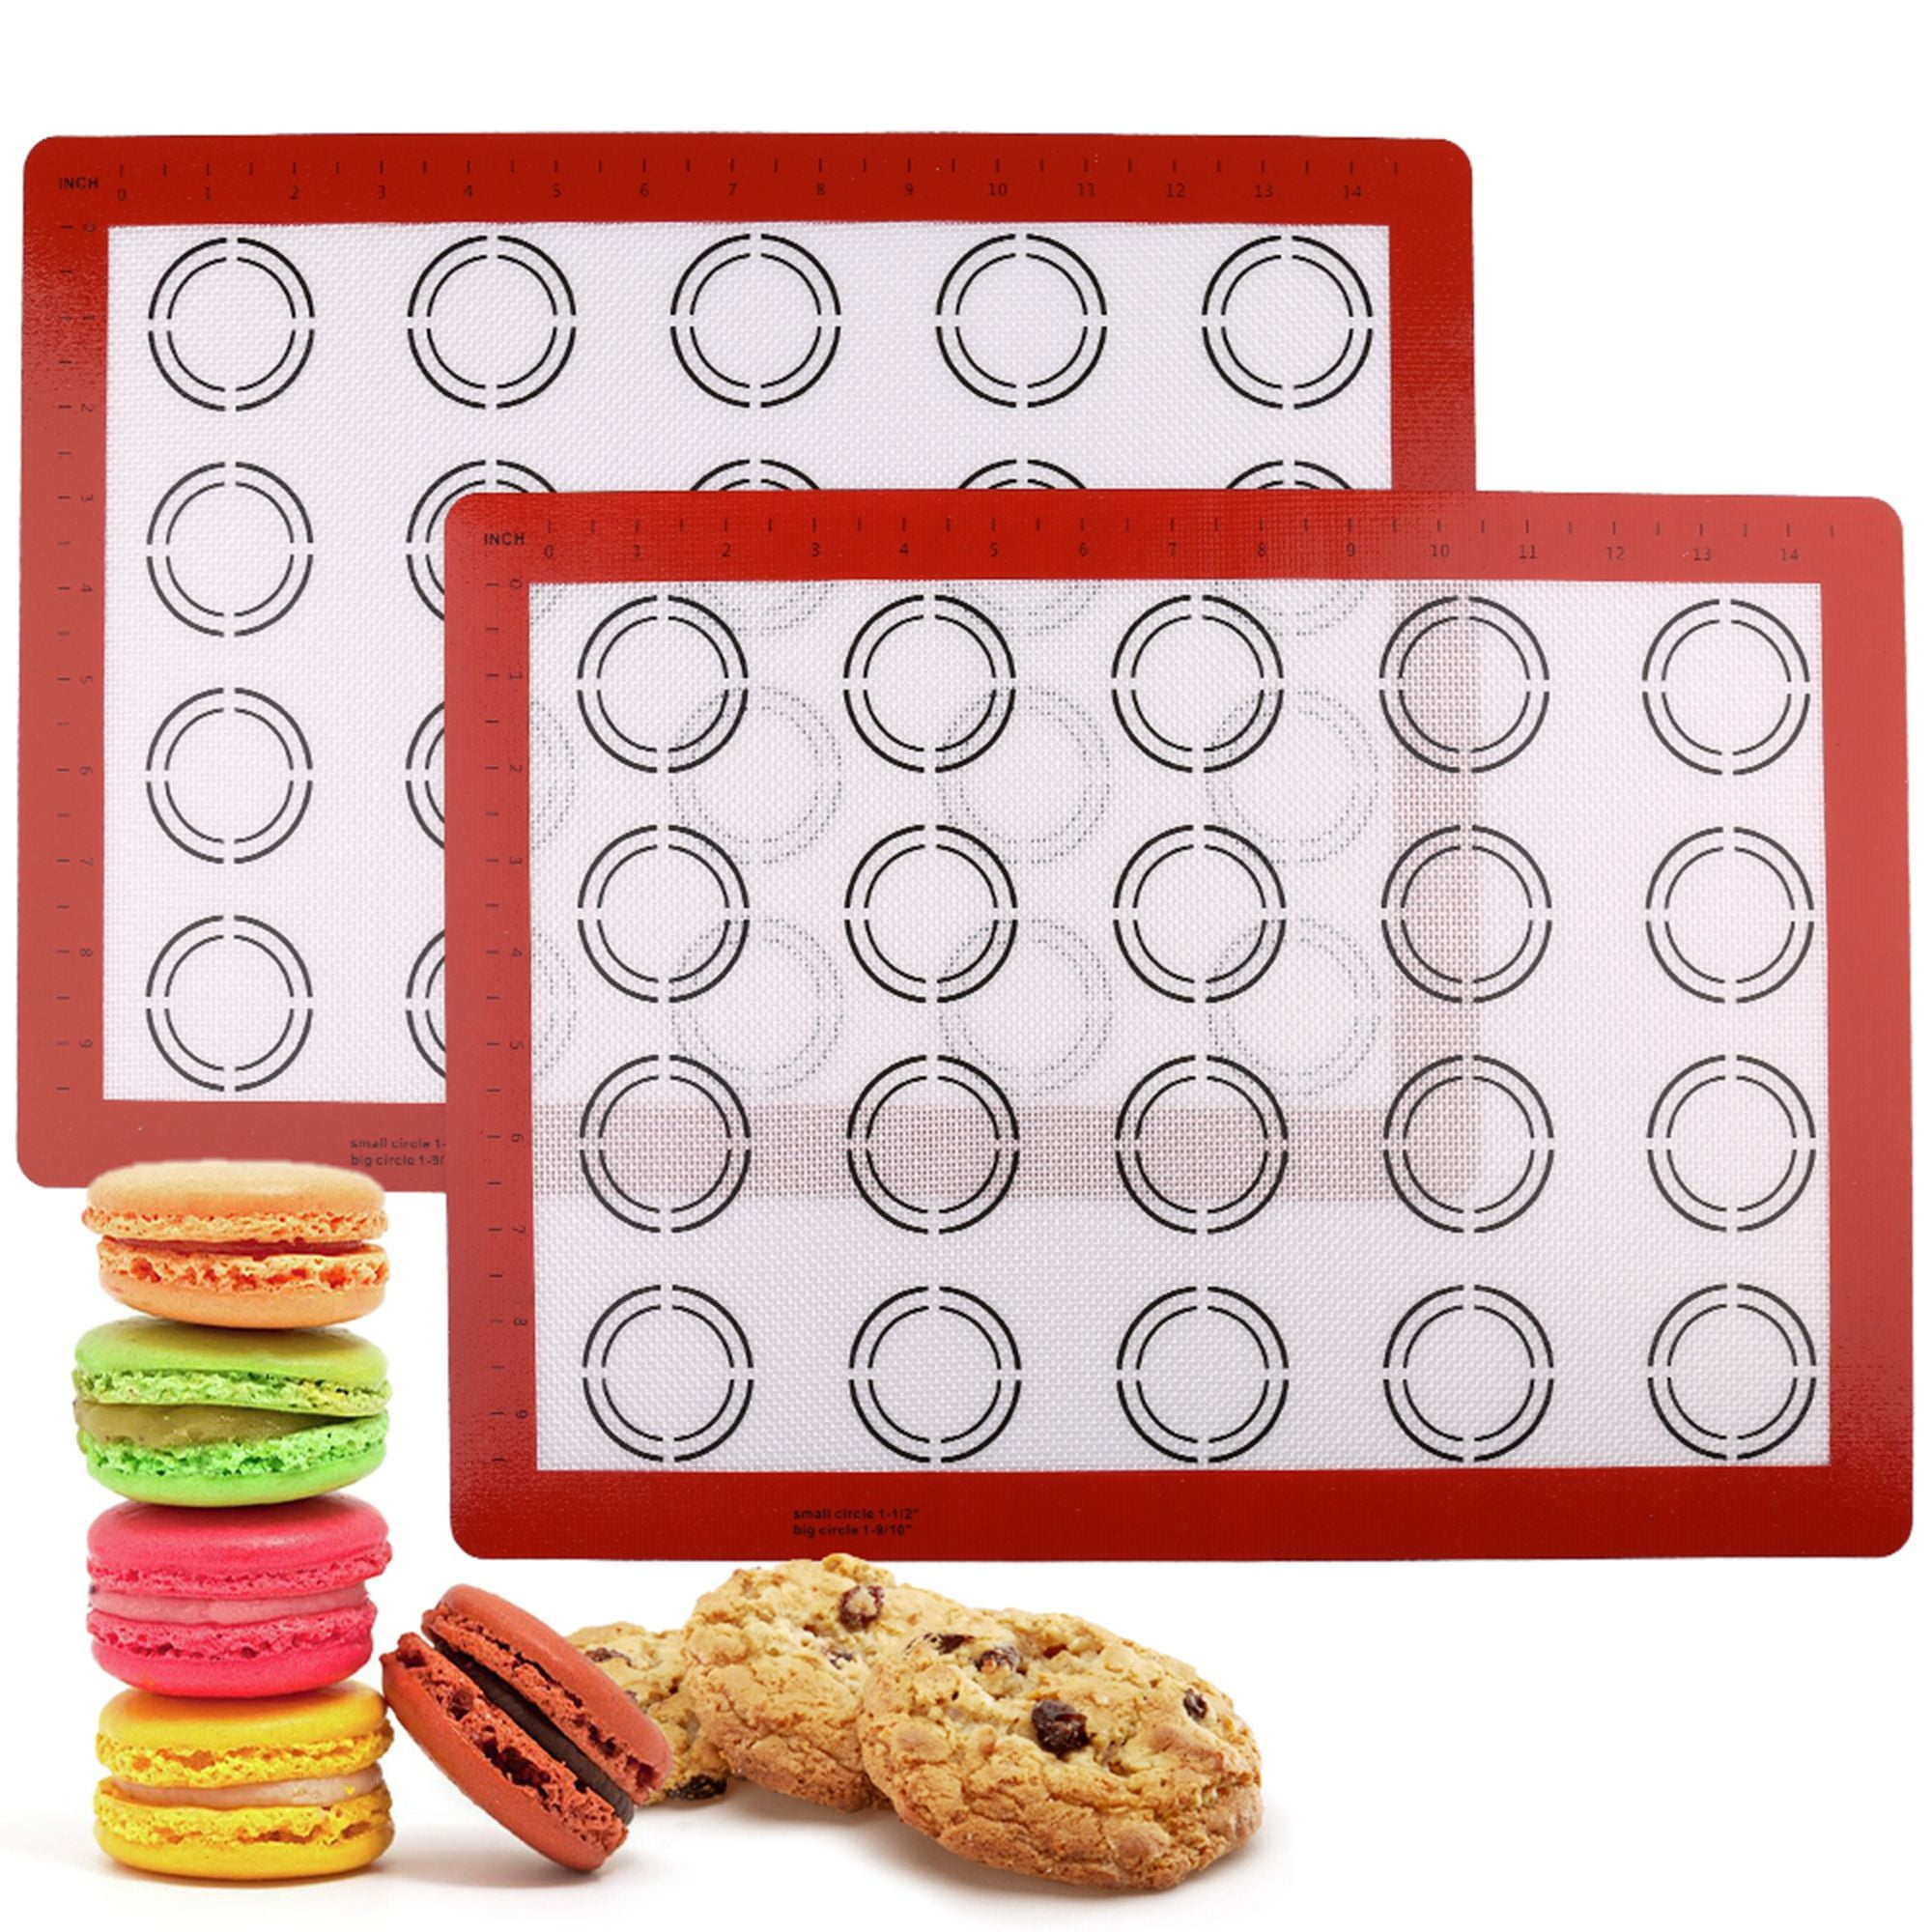 Silicone Baking mat, Half Sheet, 16.5 L x 11.5 W x 0.75 MM Thick,  Reusable Baking Sheet Liner, Thick, Non-Stick, Easy Clean, Professional  Grade, for